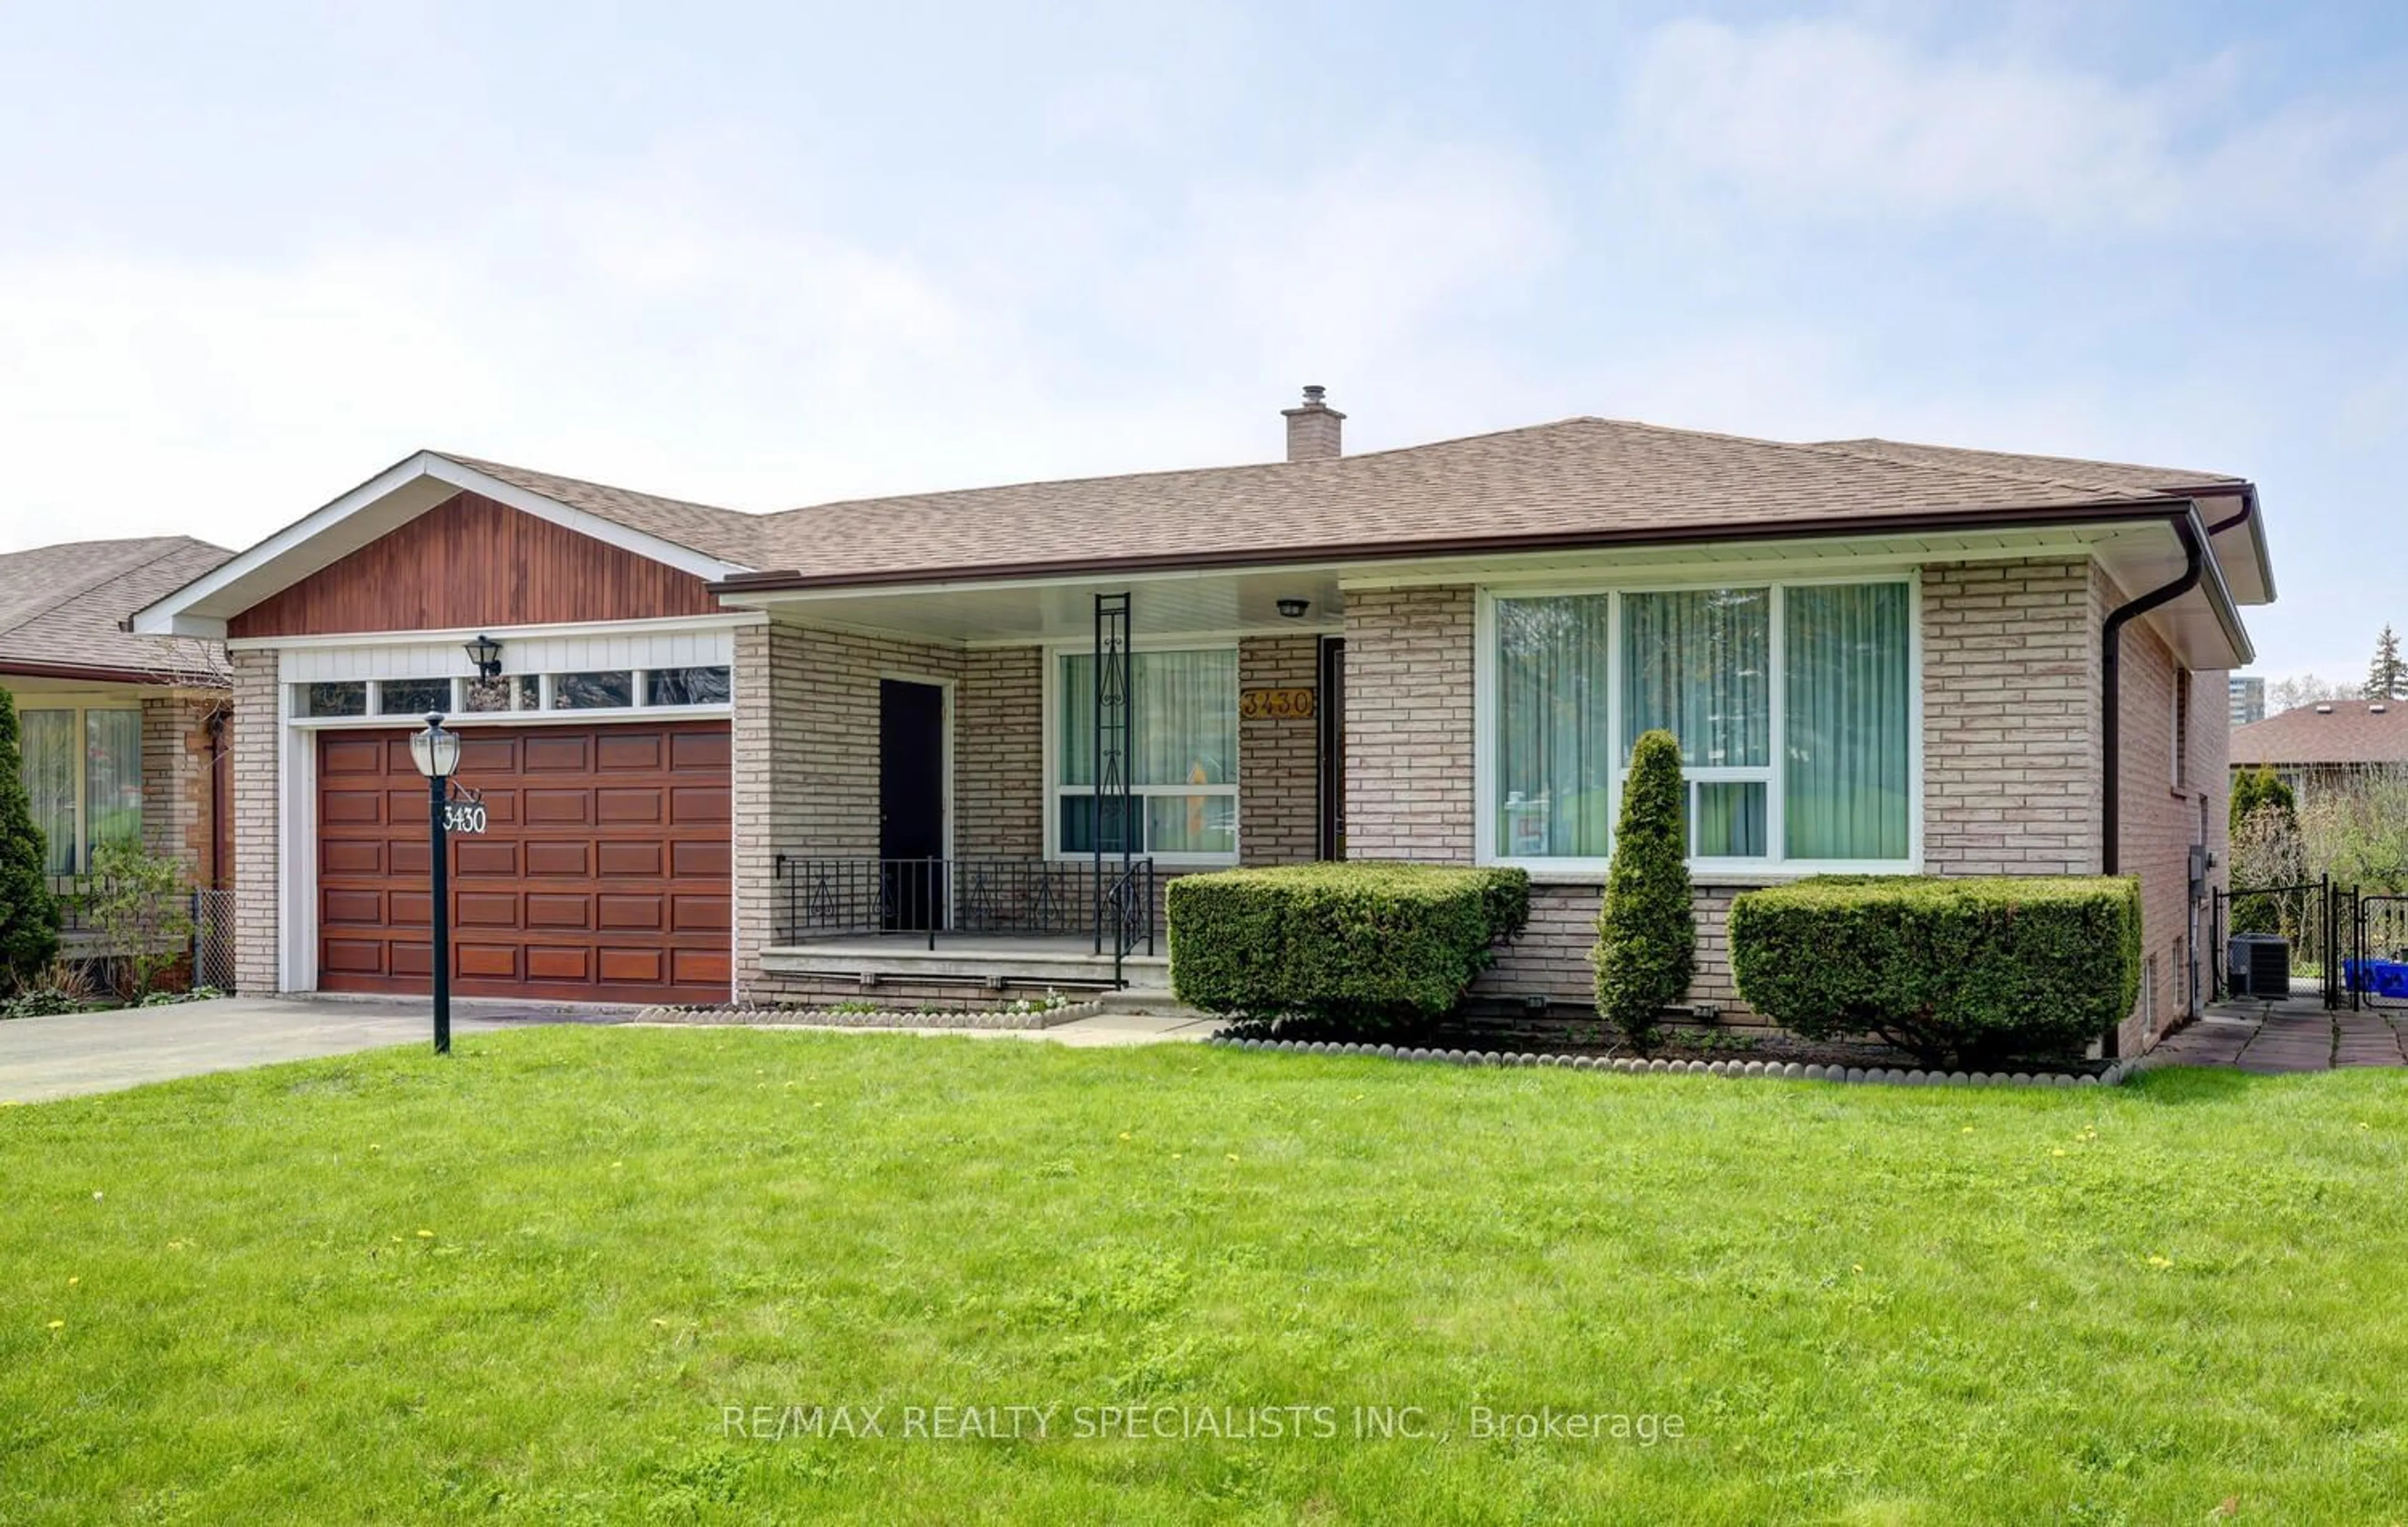 Home with brick exterior material for 3430 Golden Orchard Dr, Mississauga Ontario L4Y 3H6